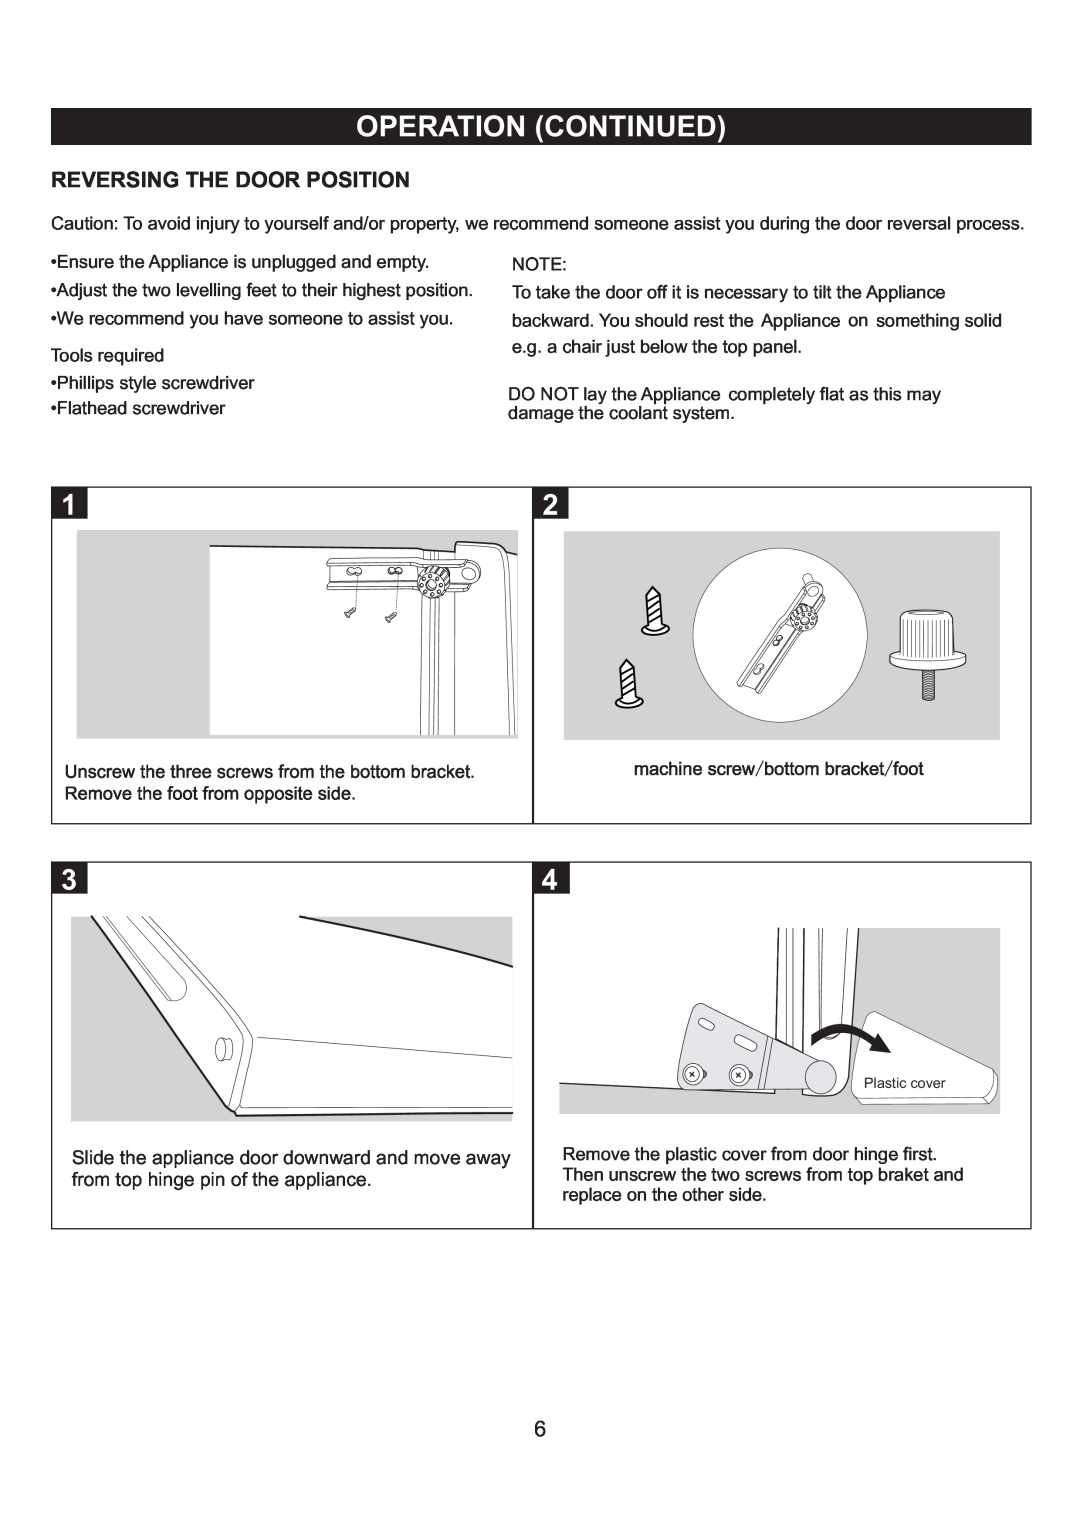 Emerson Refrigerator important safety instructions Operation Continued, Reversing The Door Position 